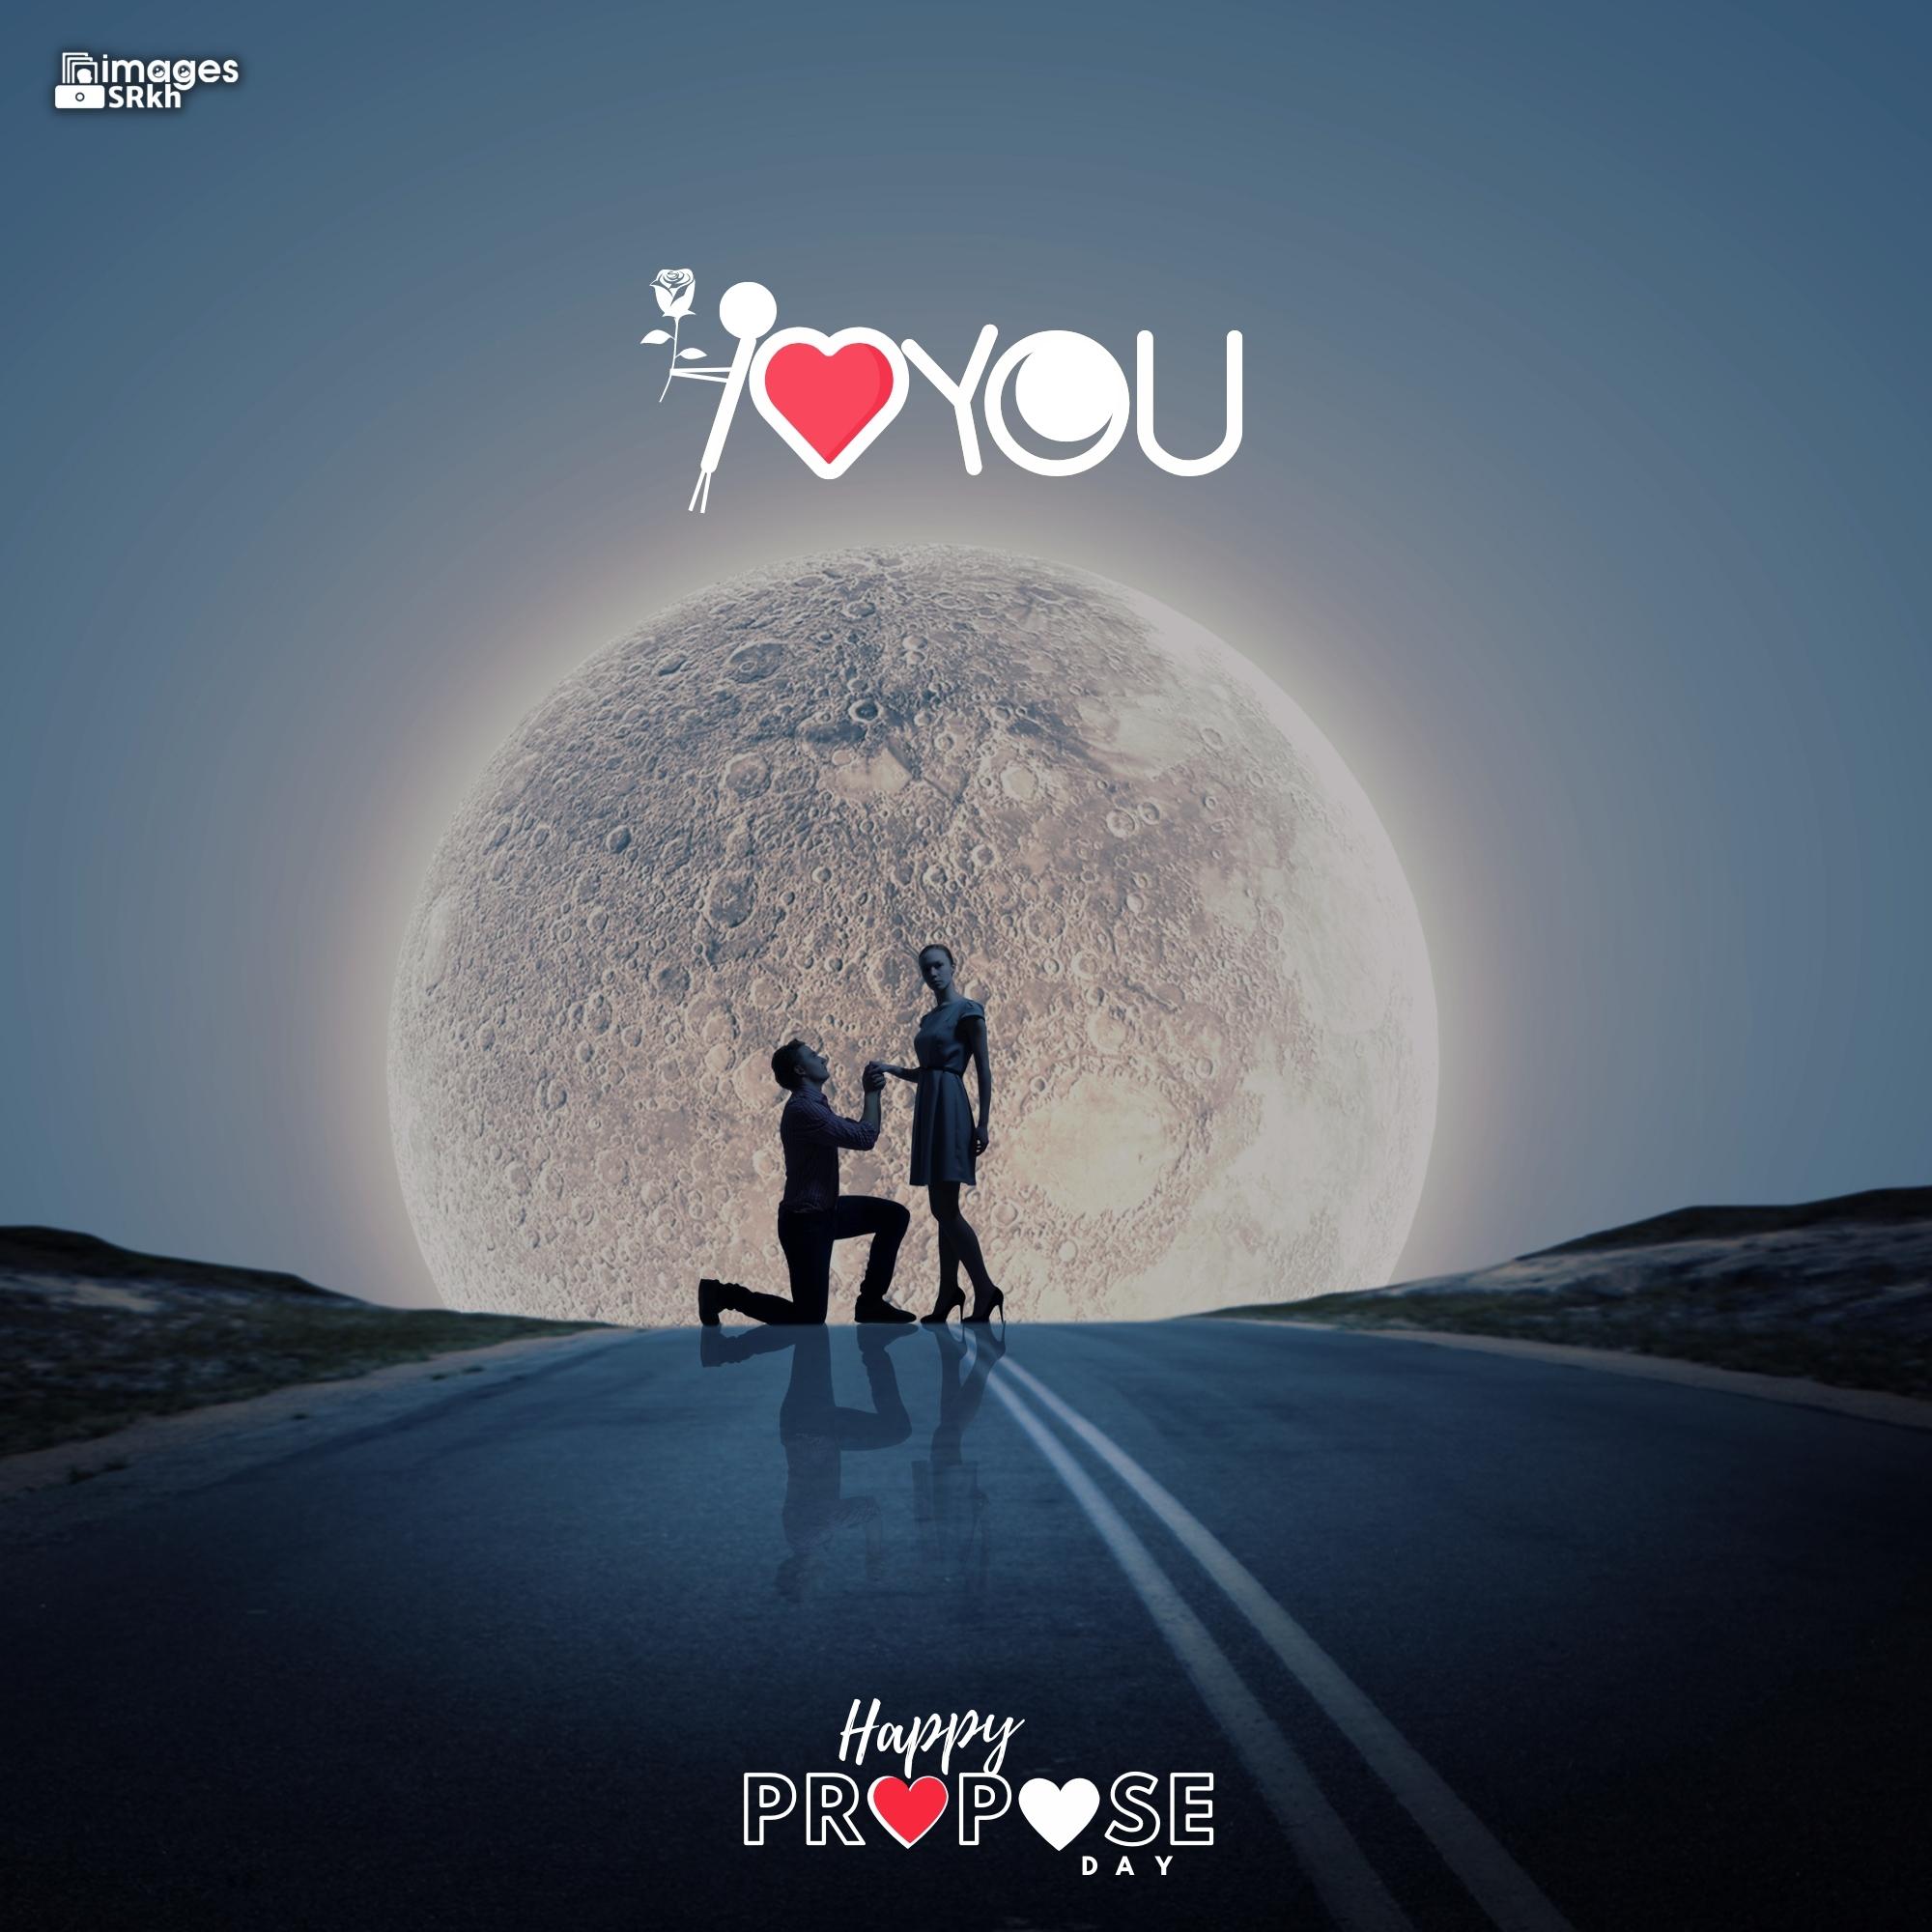 Happy Propose Day Images | 342 | I LOVE YOU